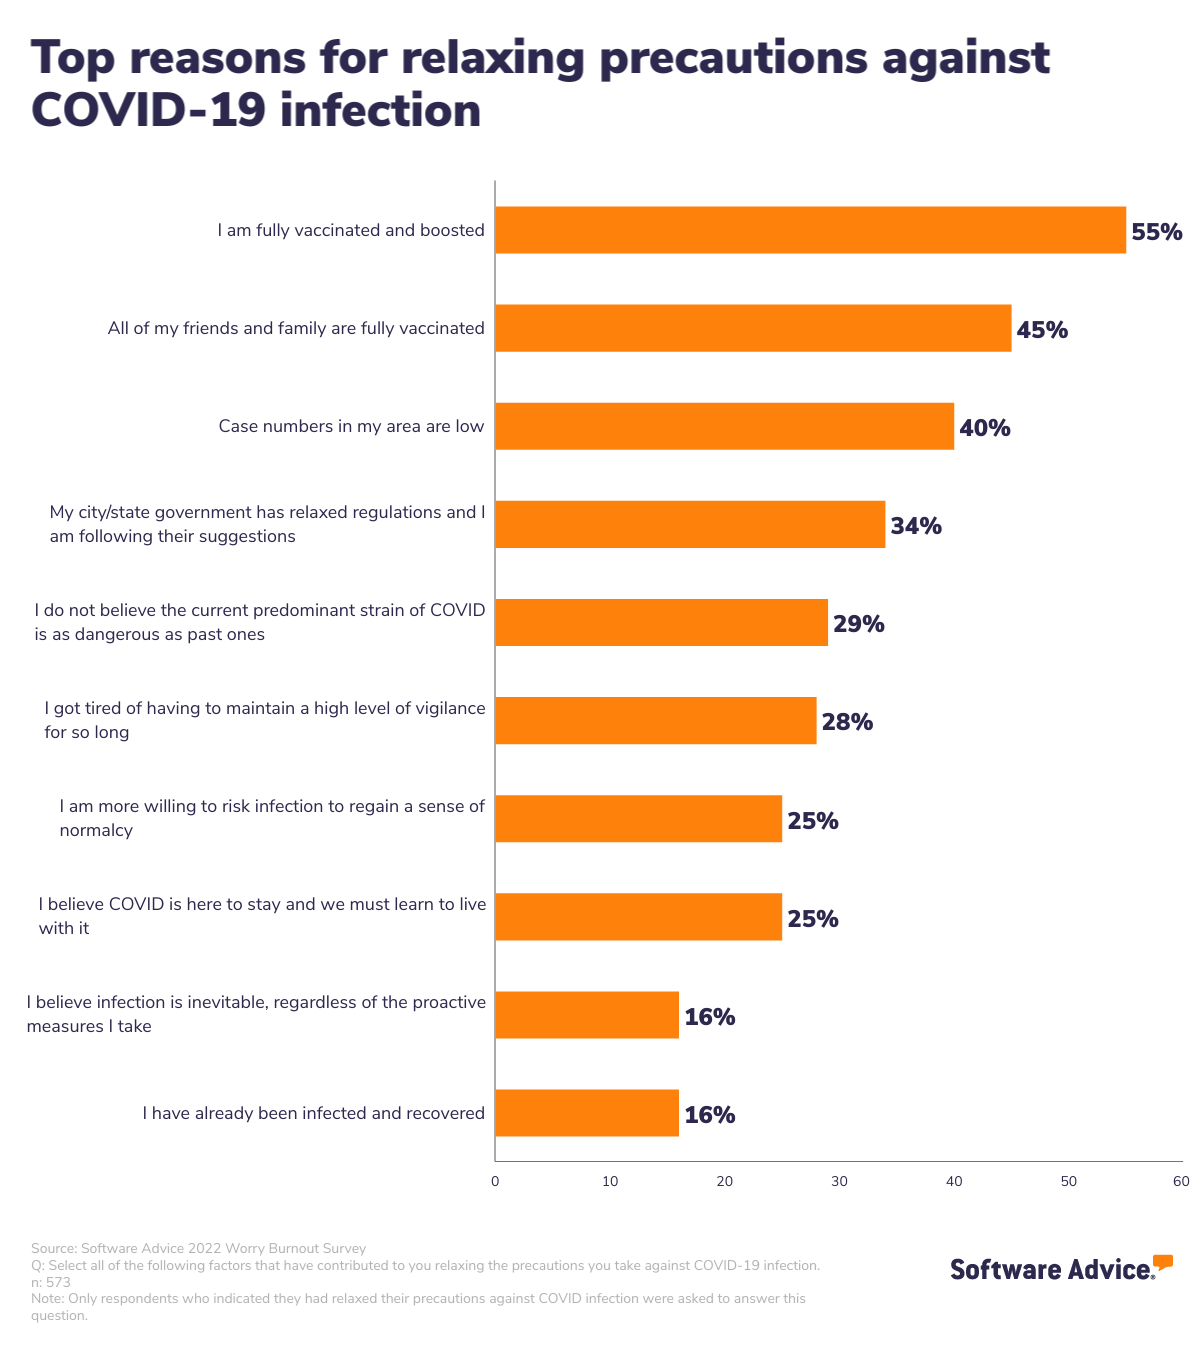 a-bar-graph-of-survey-respondents'-top-reasons-for-relaxing-precautions-against-covid-19-infection-in-descending-order